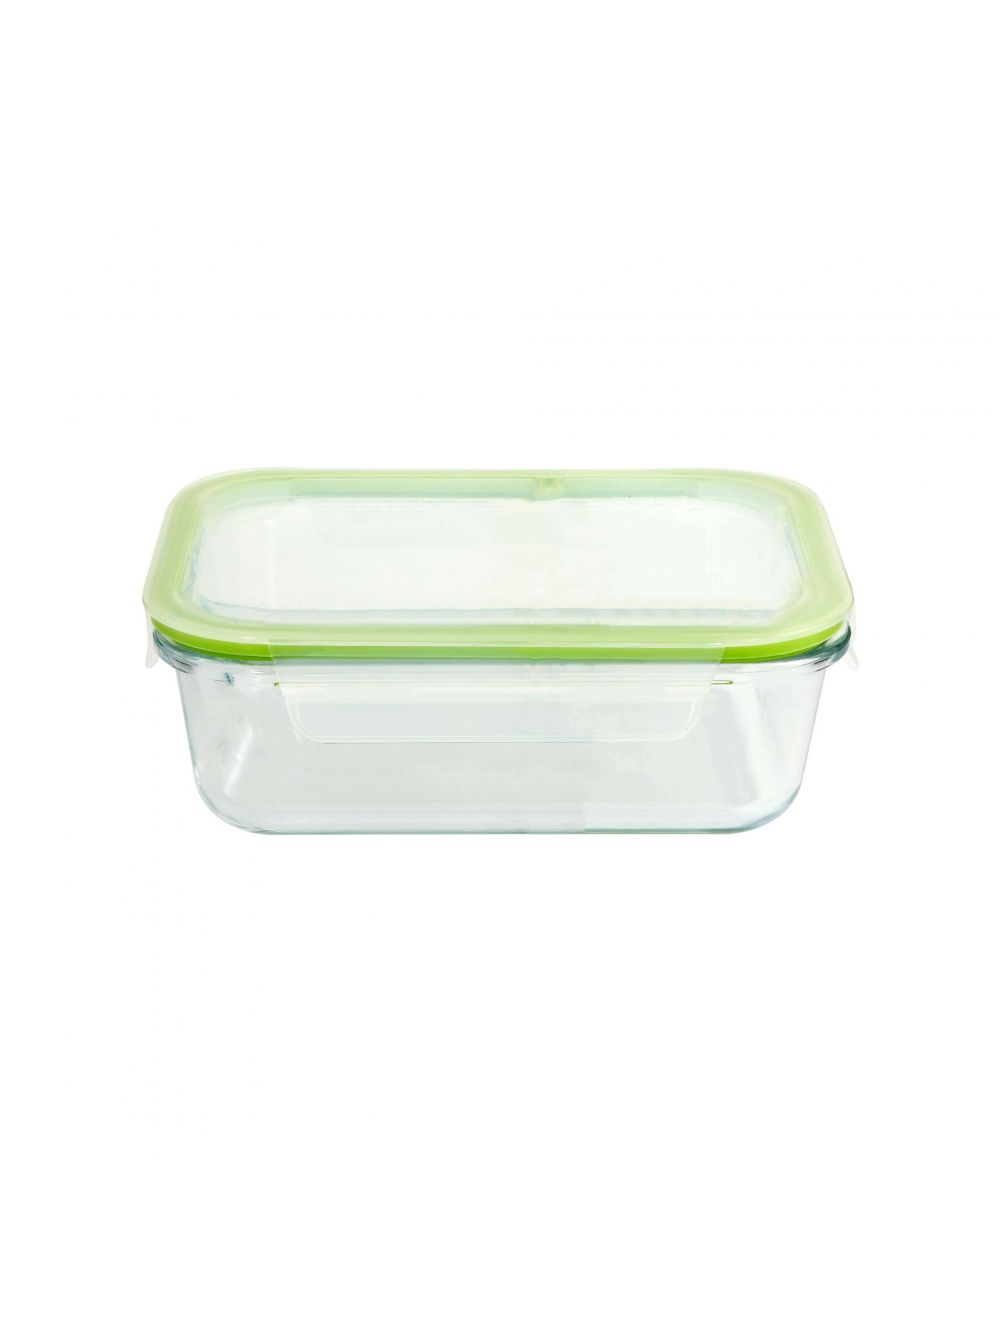 Royalford RF8813 1500 ml Glass Meal Prep Container